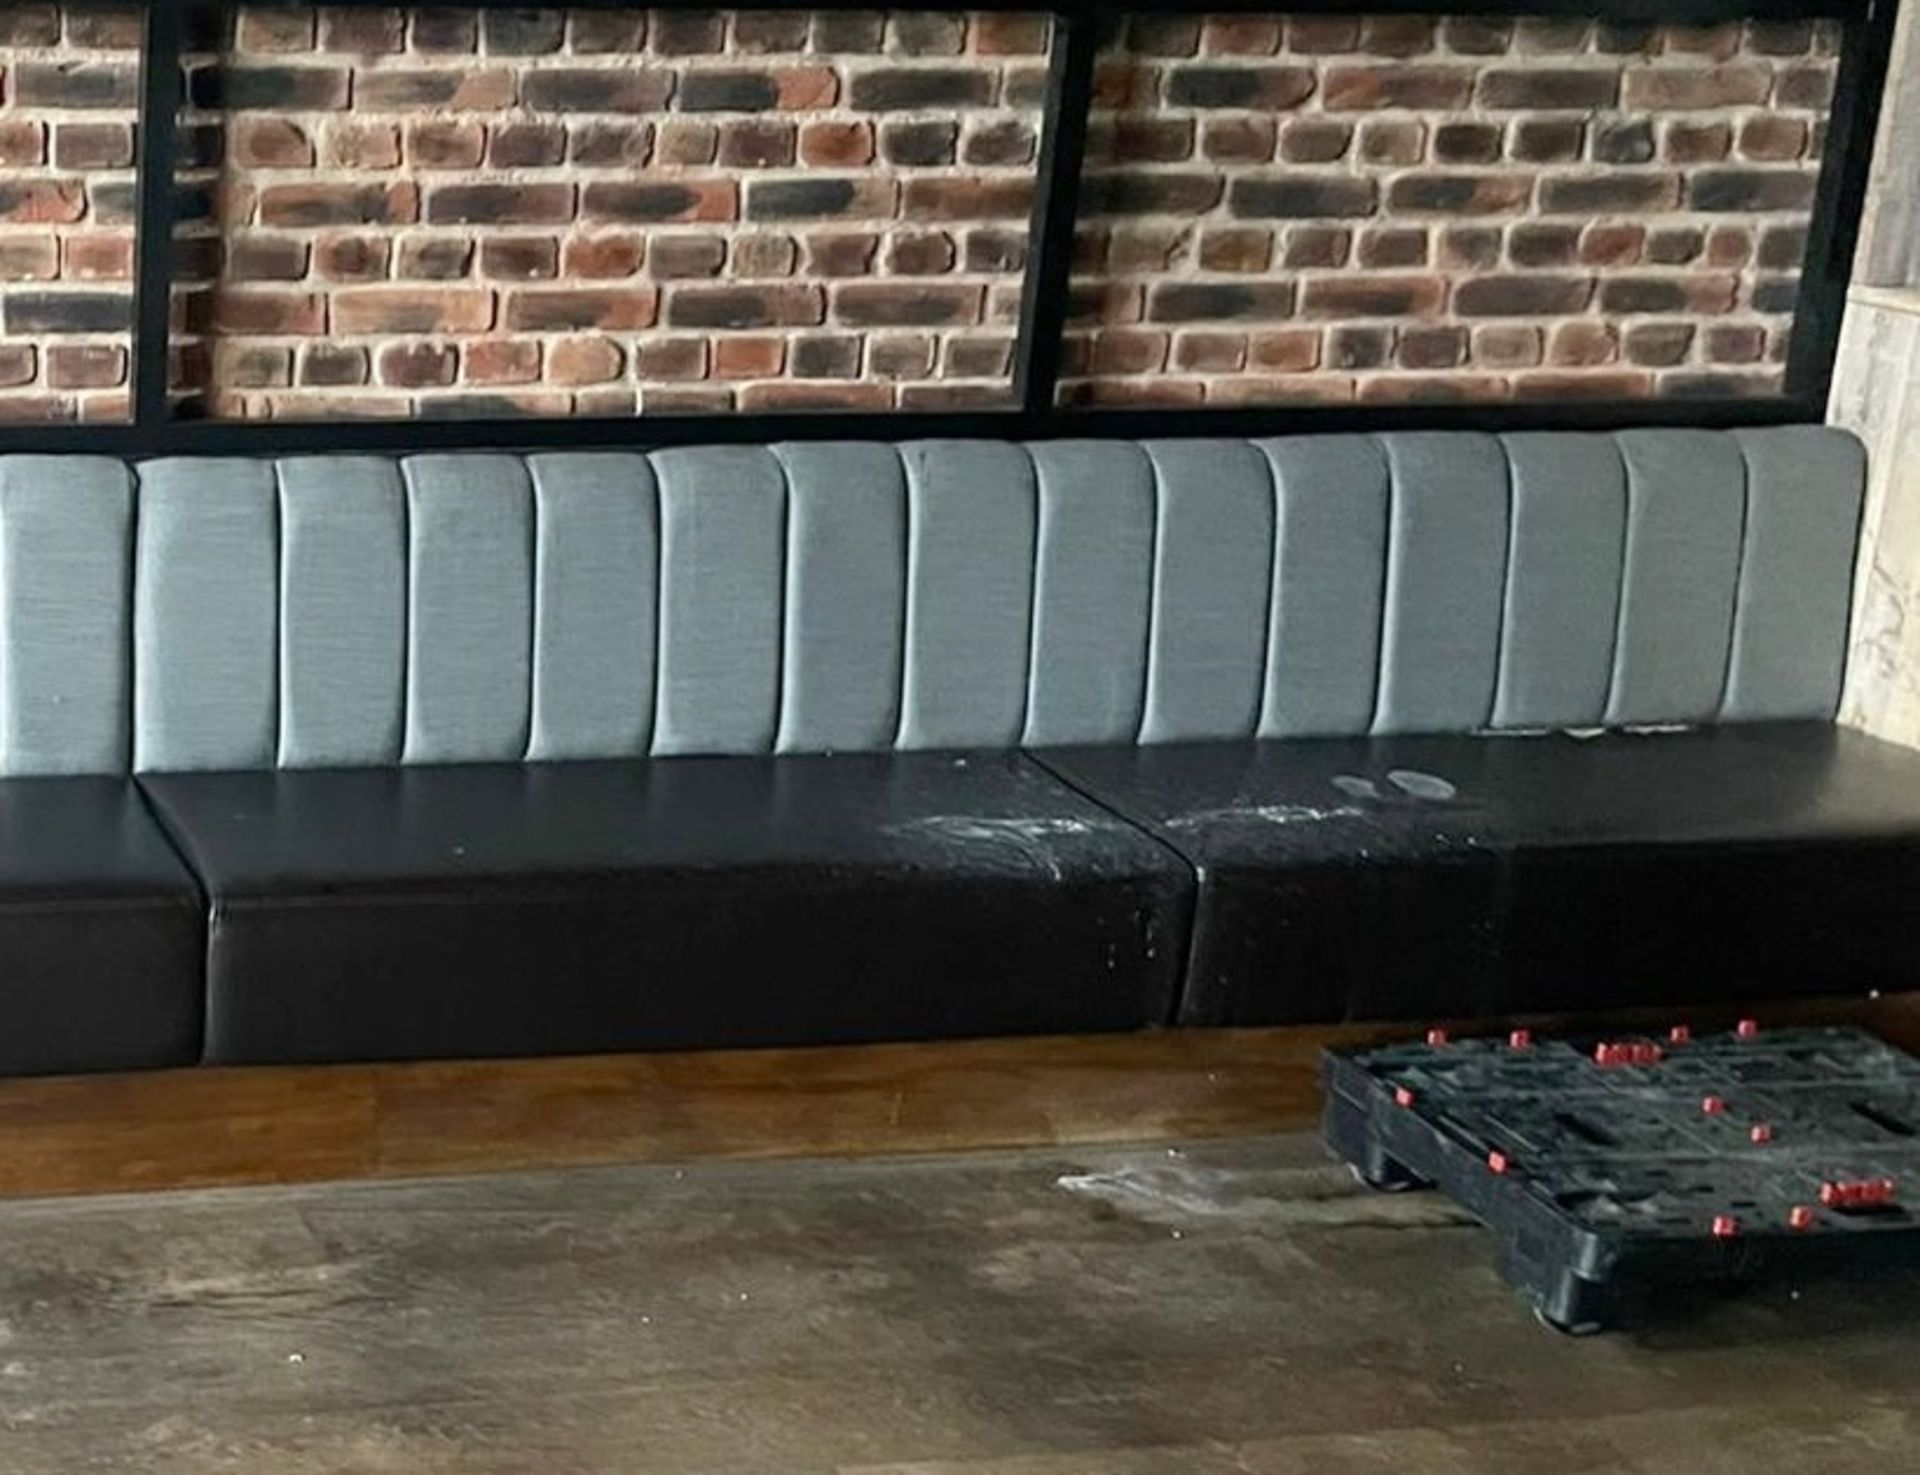 1 x Long Seating Bench With Brown Leather Seats and Grey Backrests - Comes in Four Sections For Easy - Image 5 of 5